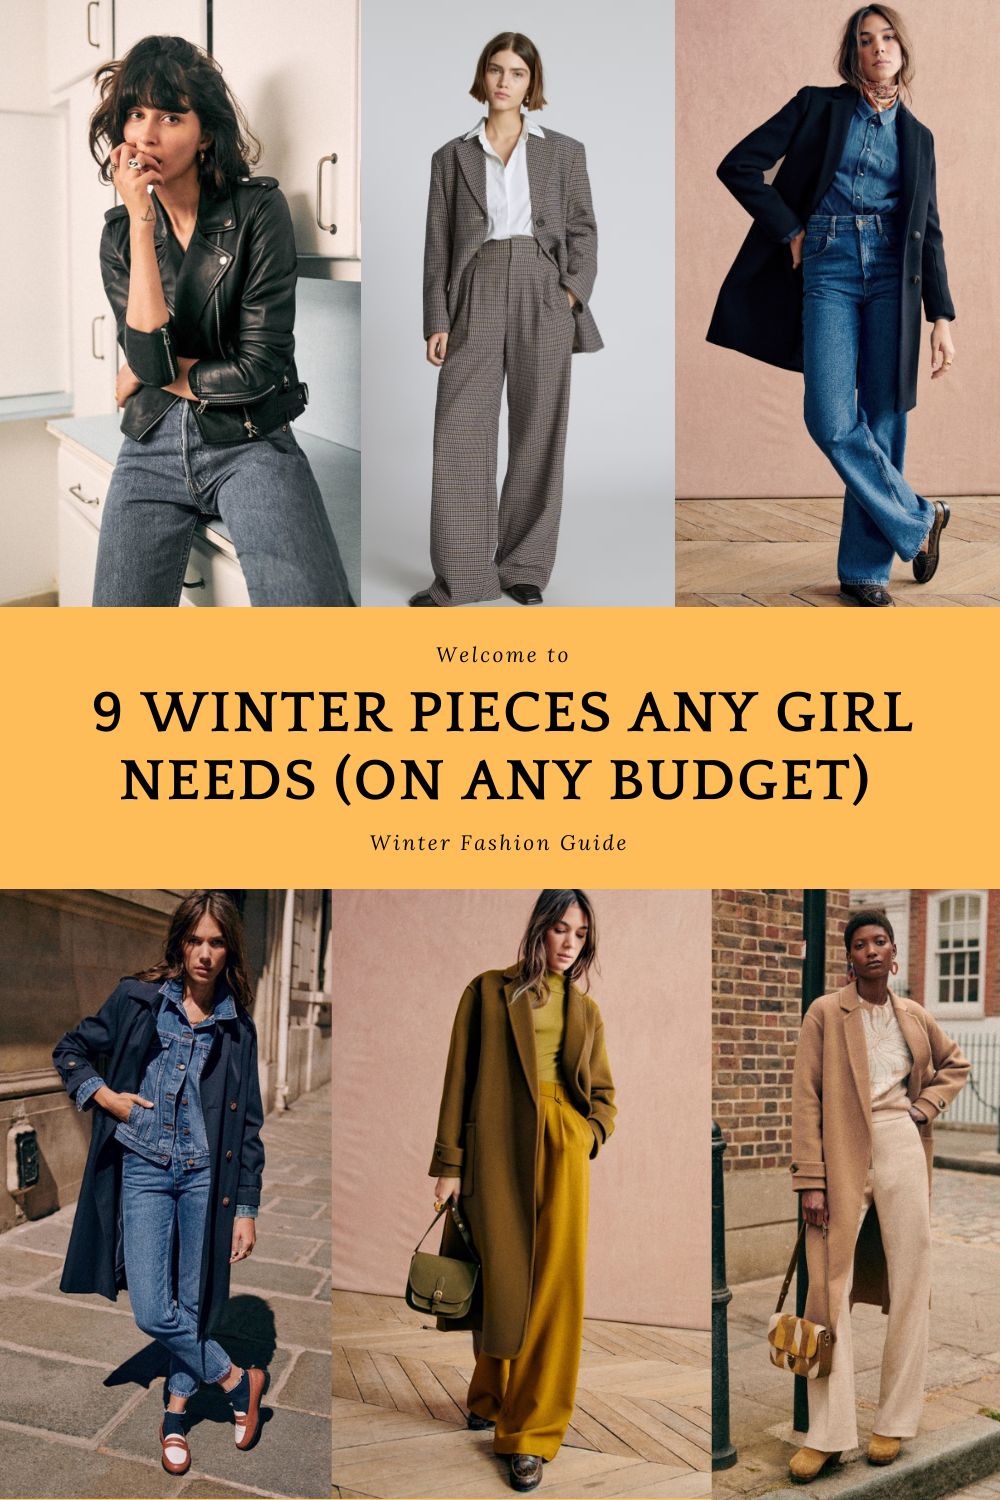 9 Winter Pieces Any Girl Needs (On Any Budget)